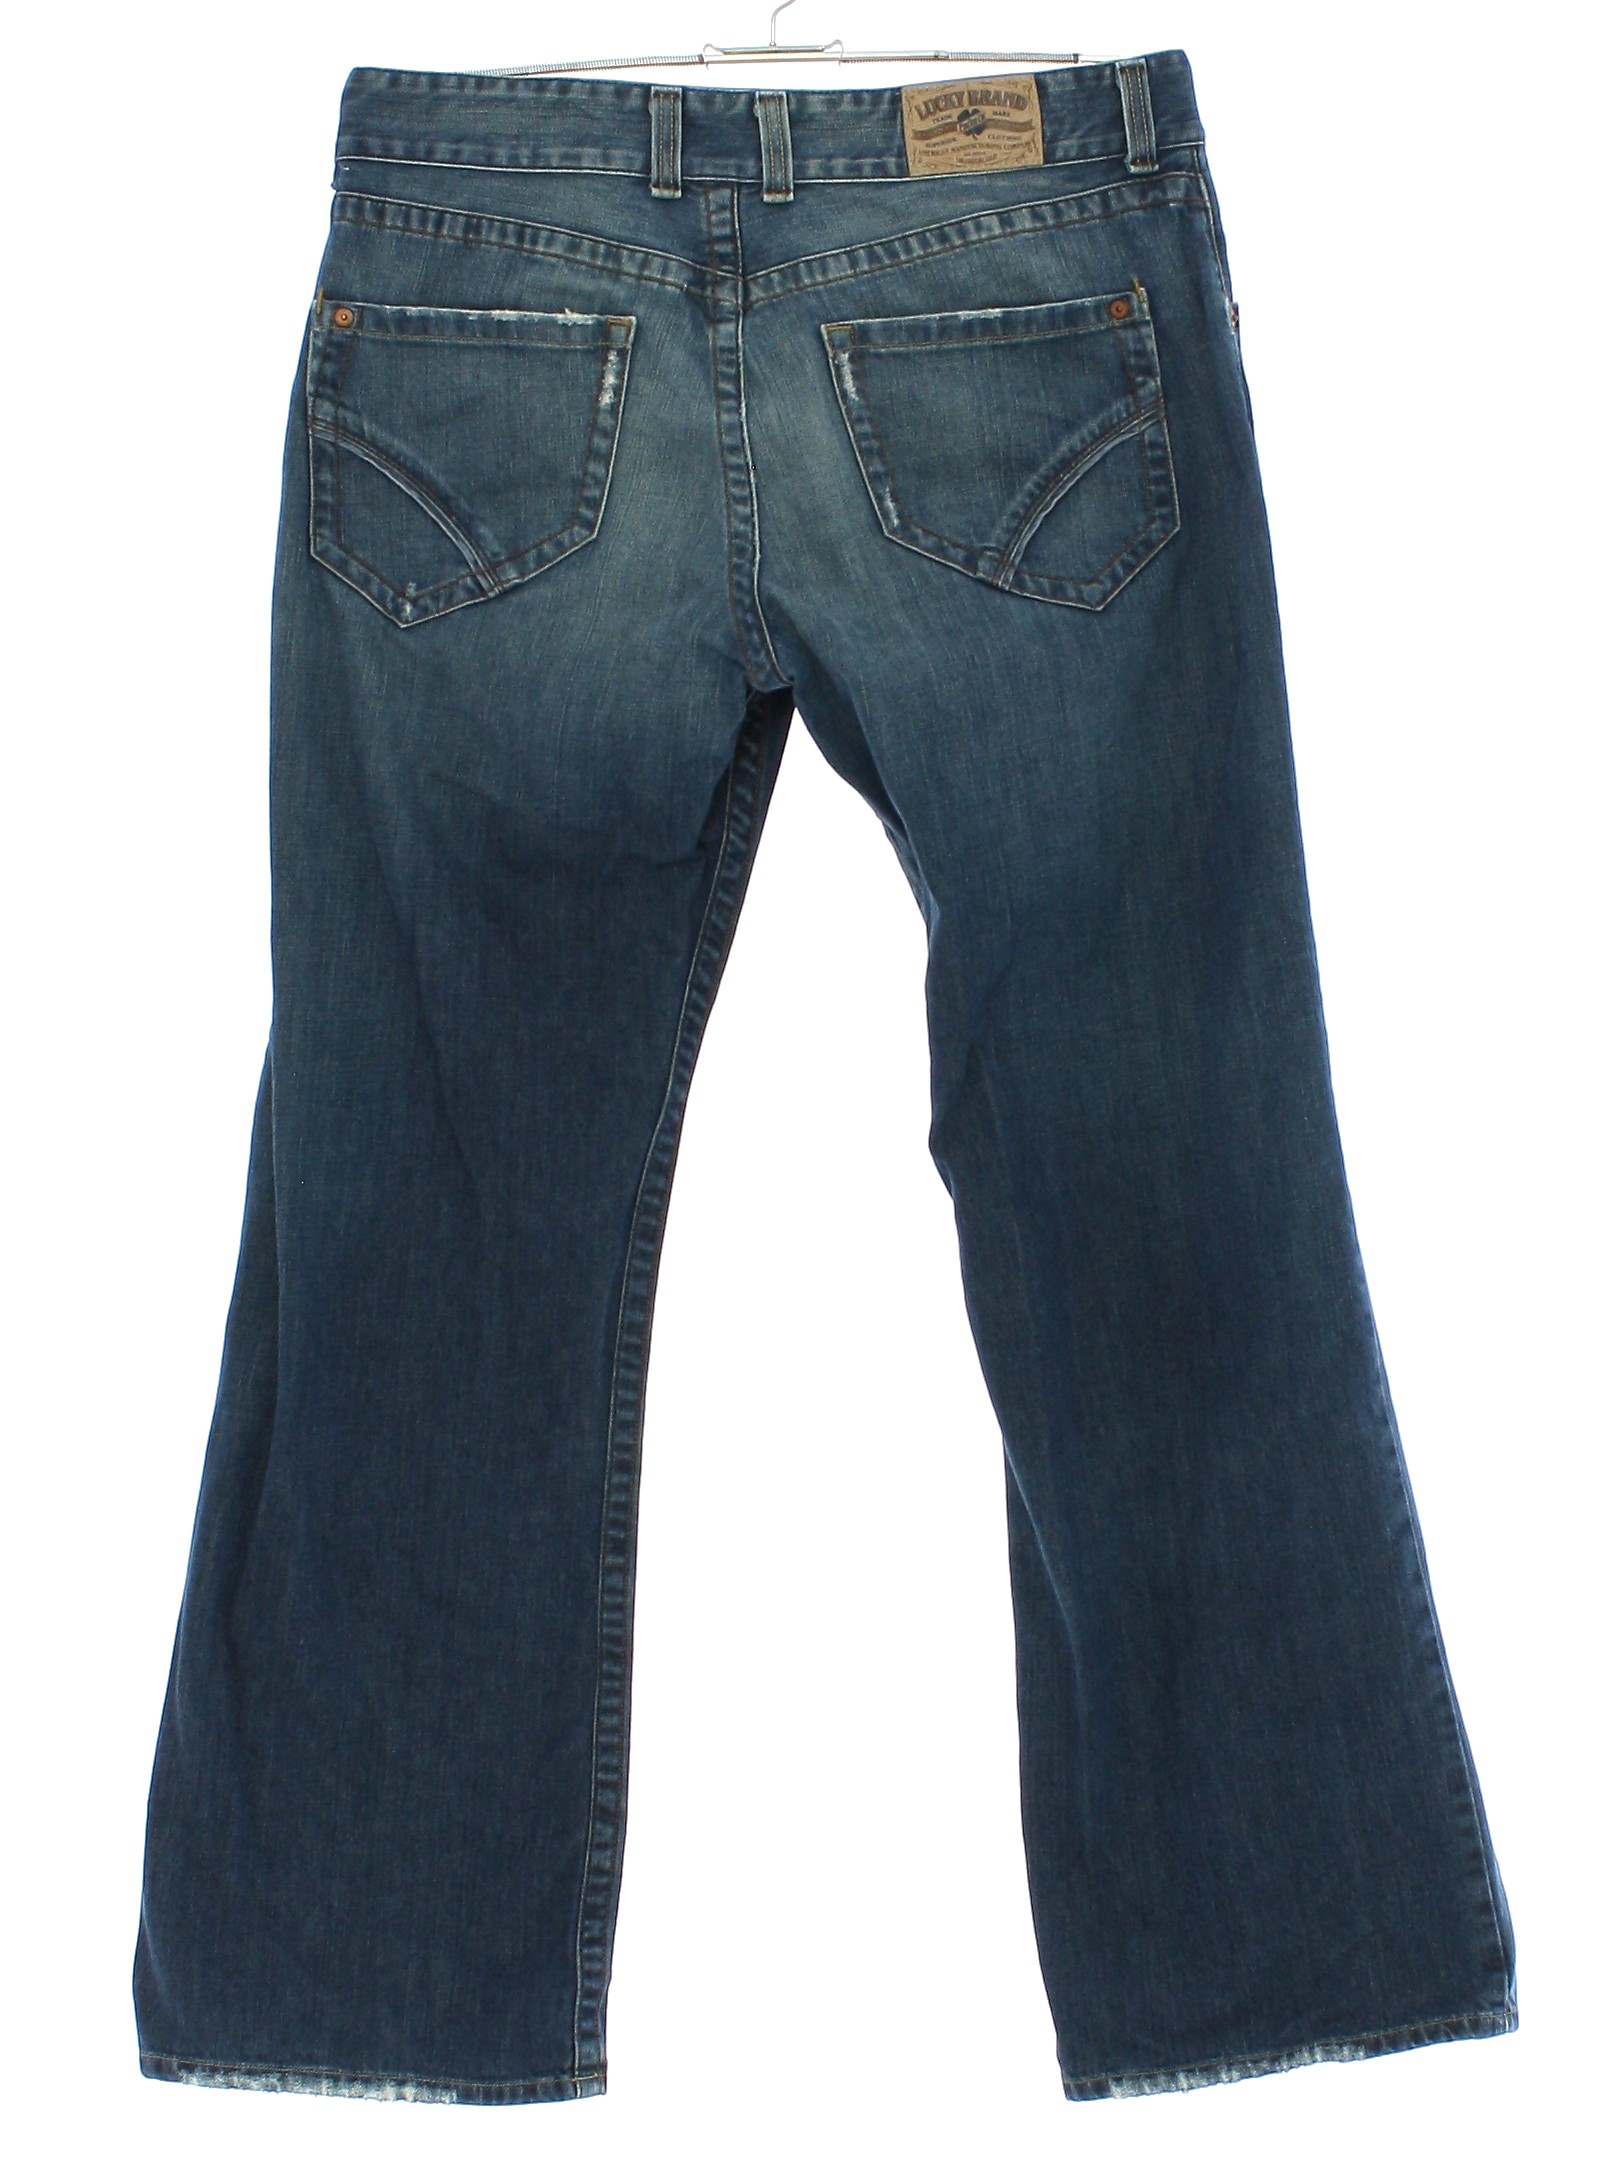 Flared Pants / Flares: 90s (Late y2k 2000s, 2007) -Lucky Brand Jeans, Made  in USA- Mens medium blue cotton denim with dark gold topstitching, classic  five pocket low rise Colorado relaxed bootleg